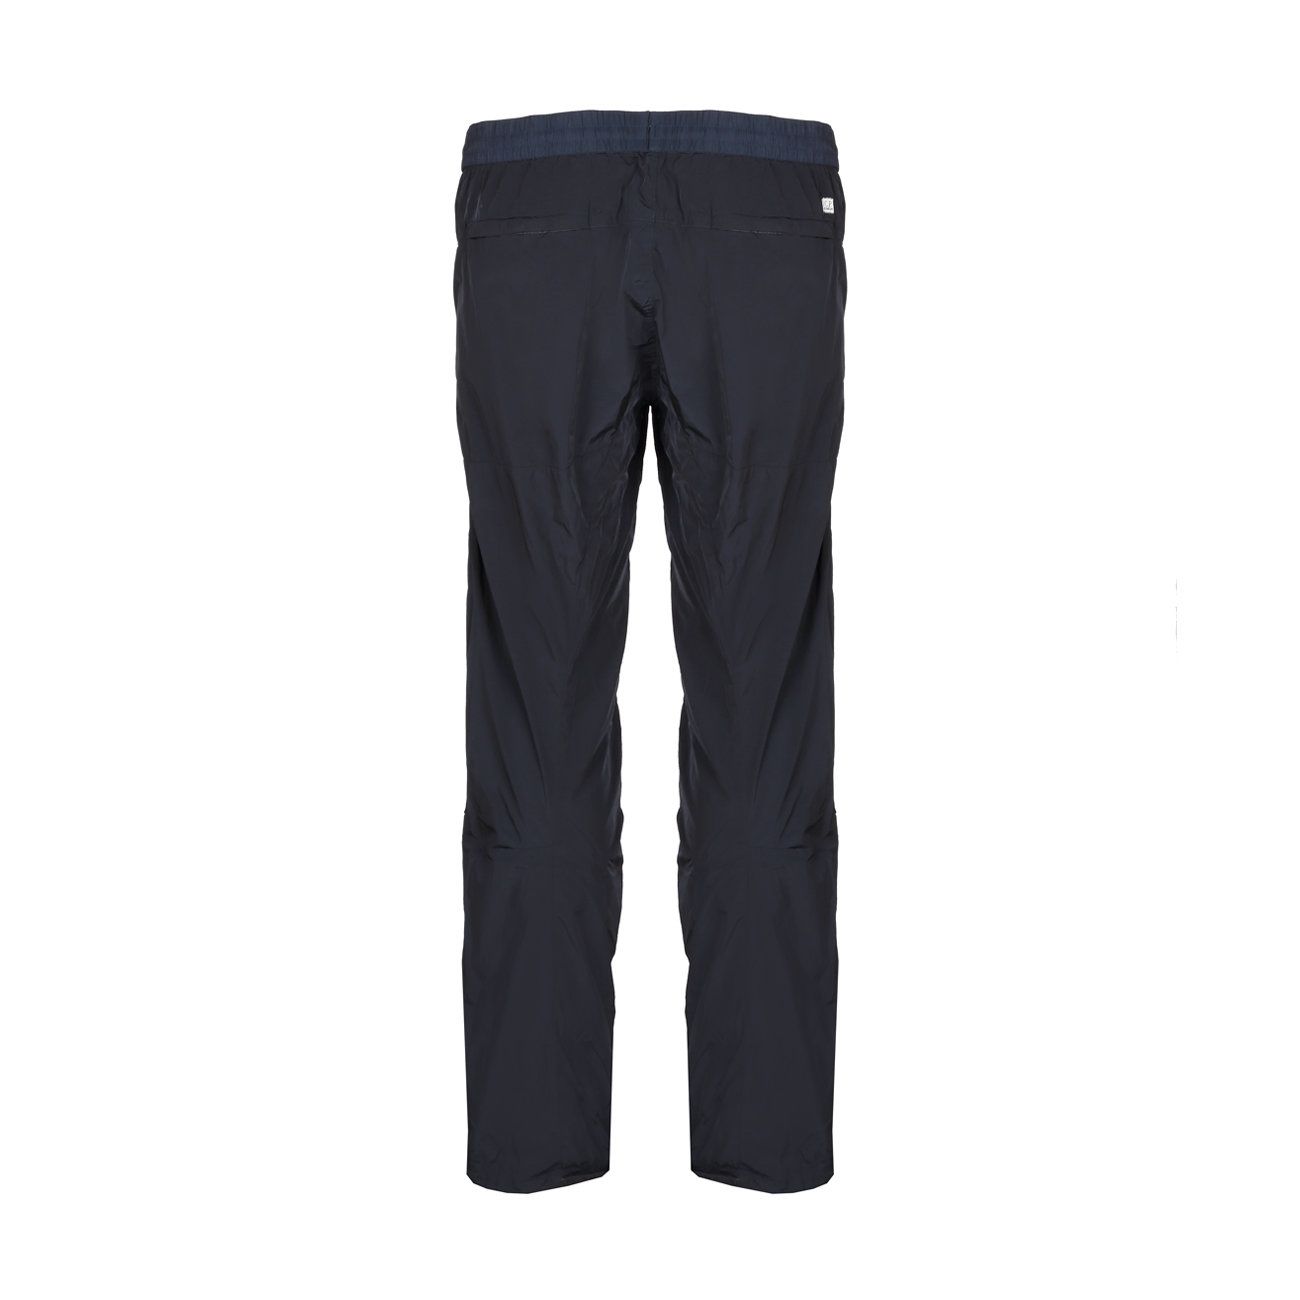 NYLON QUILTED DOWN TROUSERS – The Real McCoy's